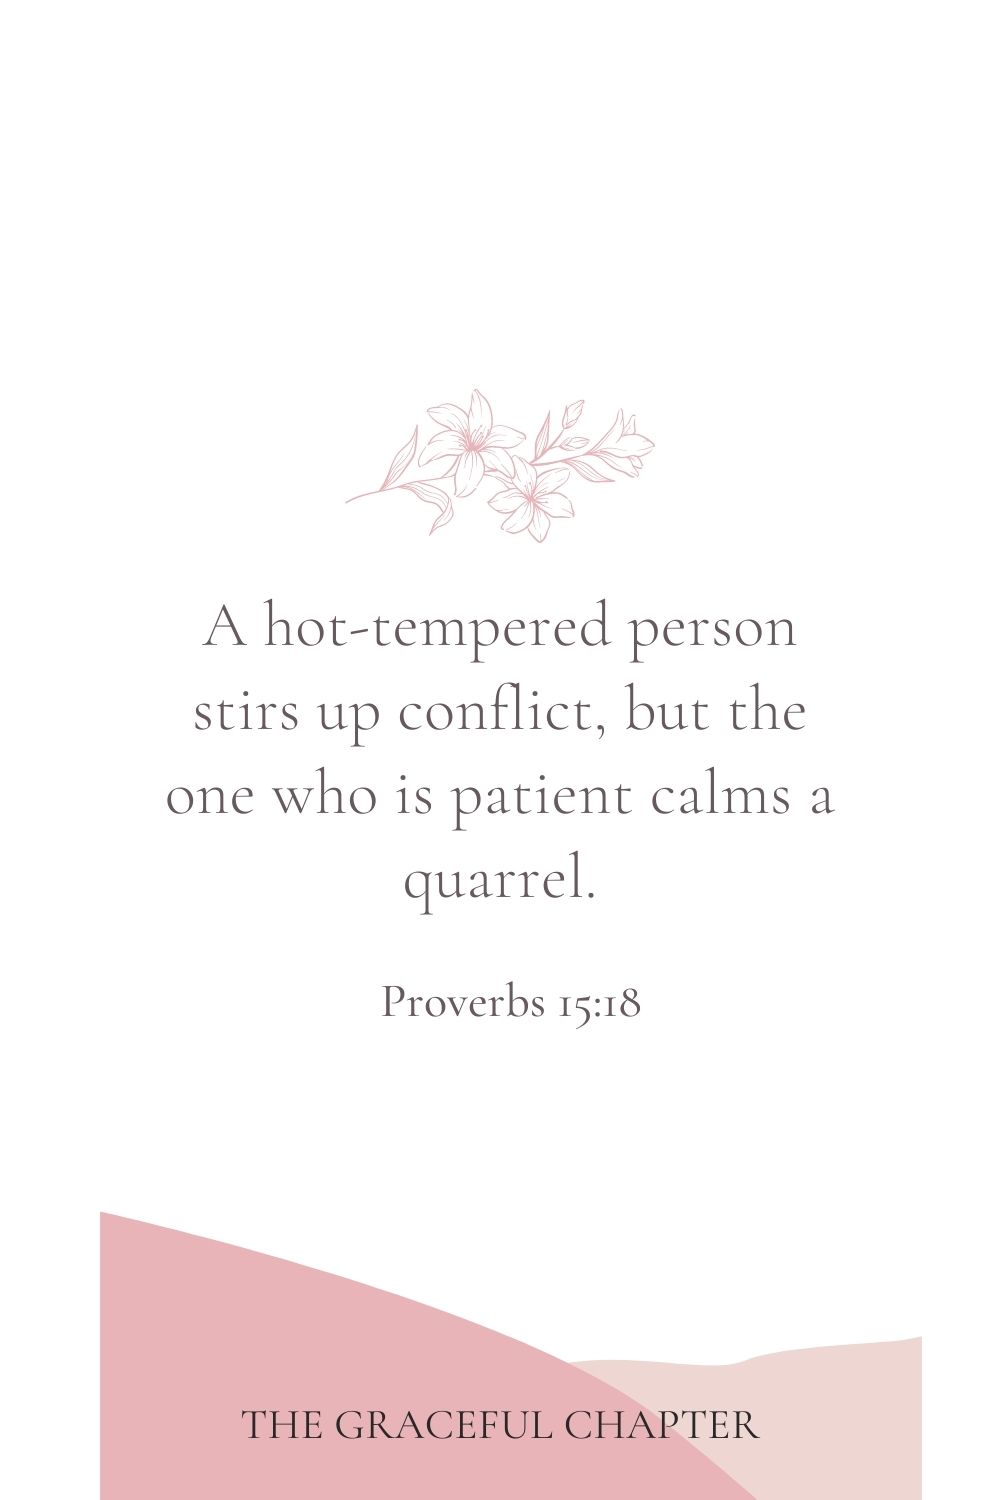 A hot-tempered person stirs up conflict, but the one who is patient calms a quarrel. Proverbs 15:18